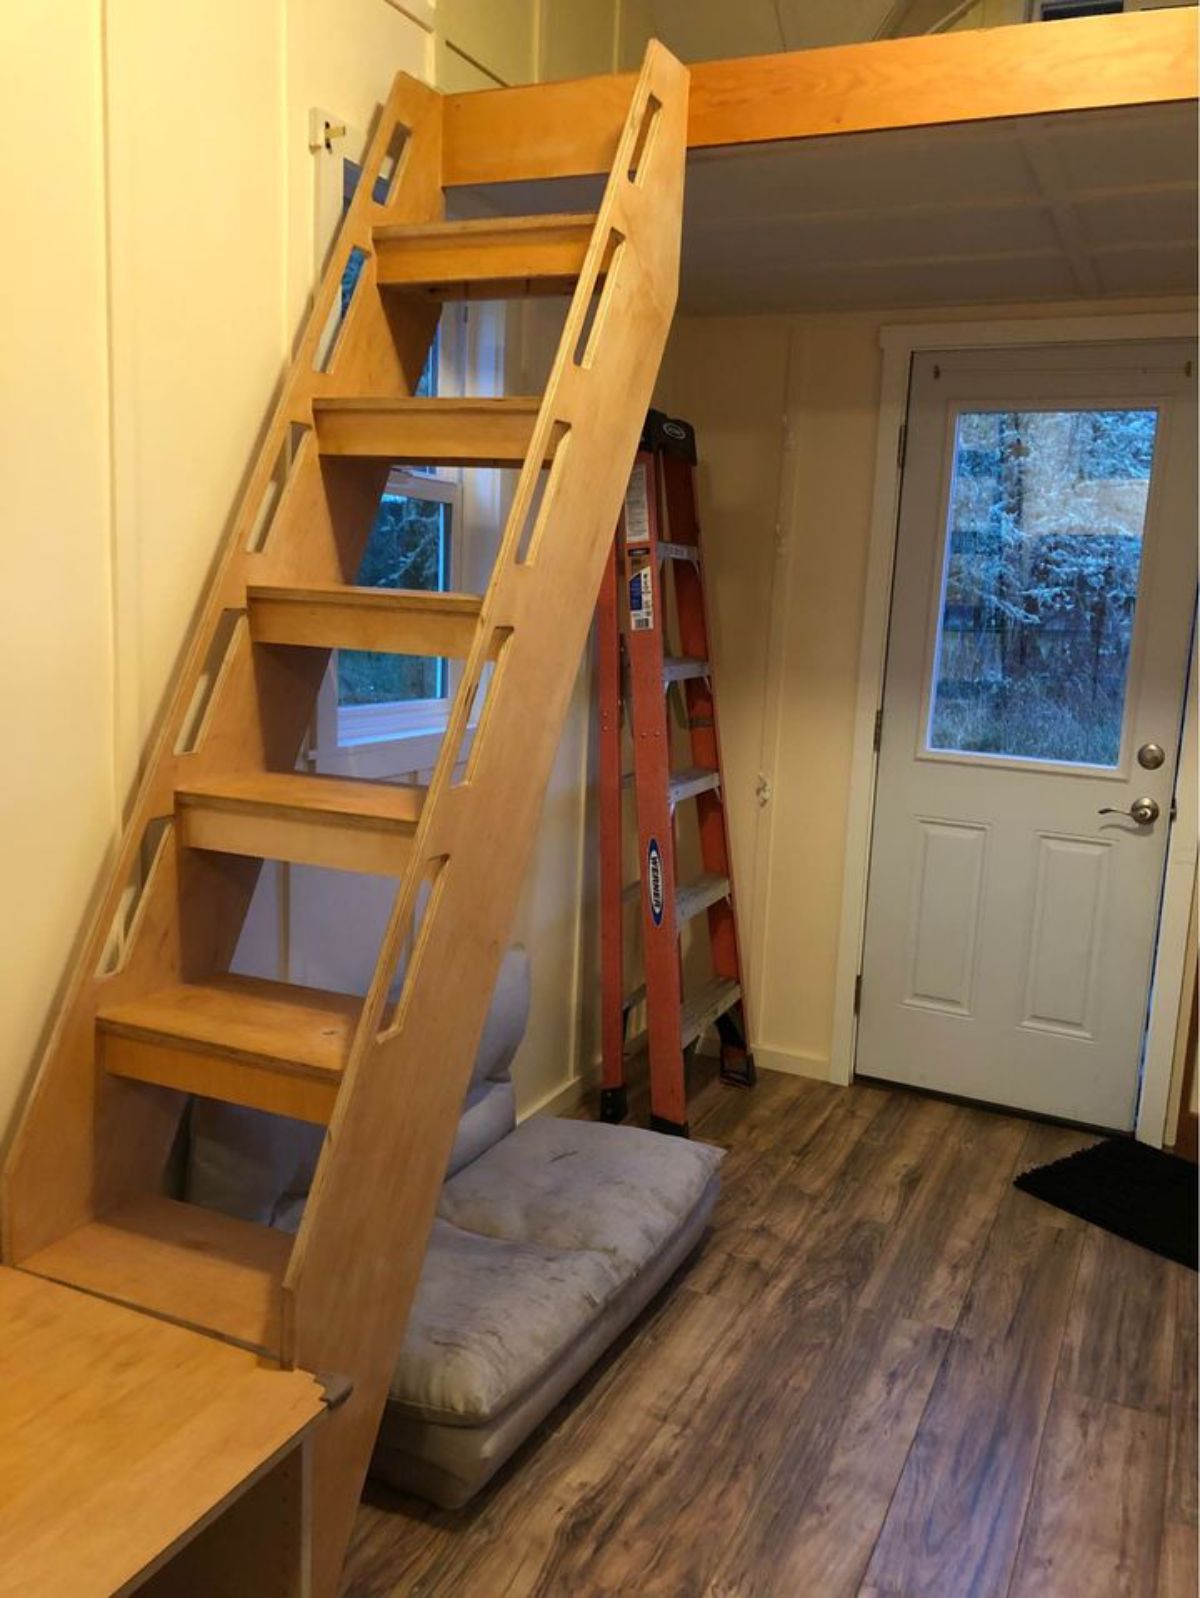 Living area has couch just besides the ladder for bedroom